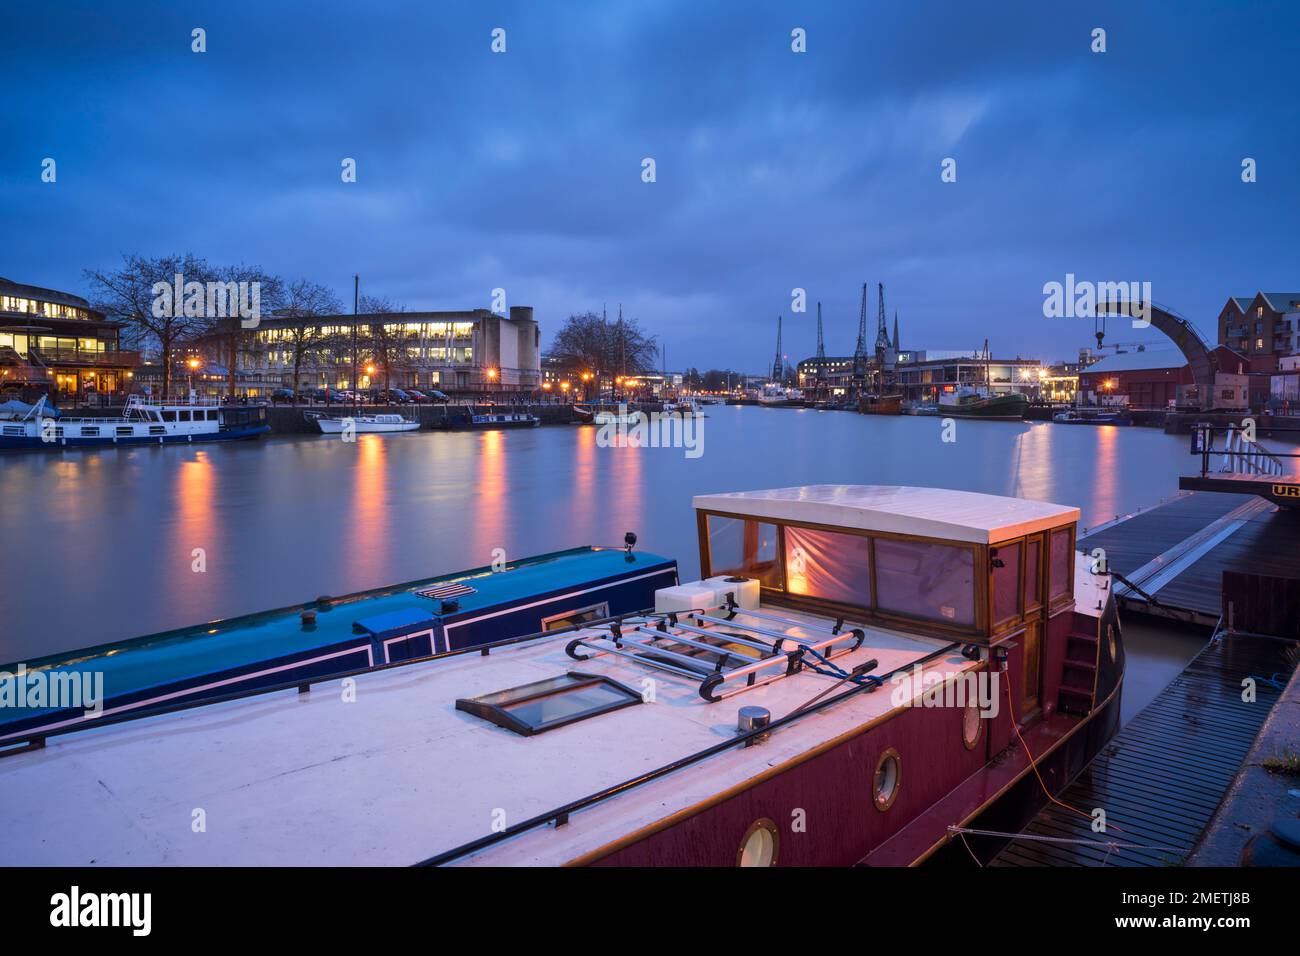 Dusk view of Bristol's Floating Harbour on the River Avon, England Stock Photo